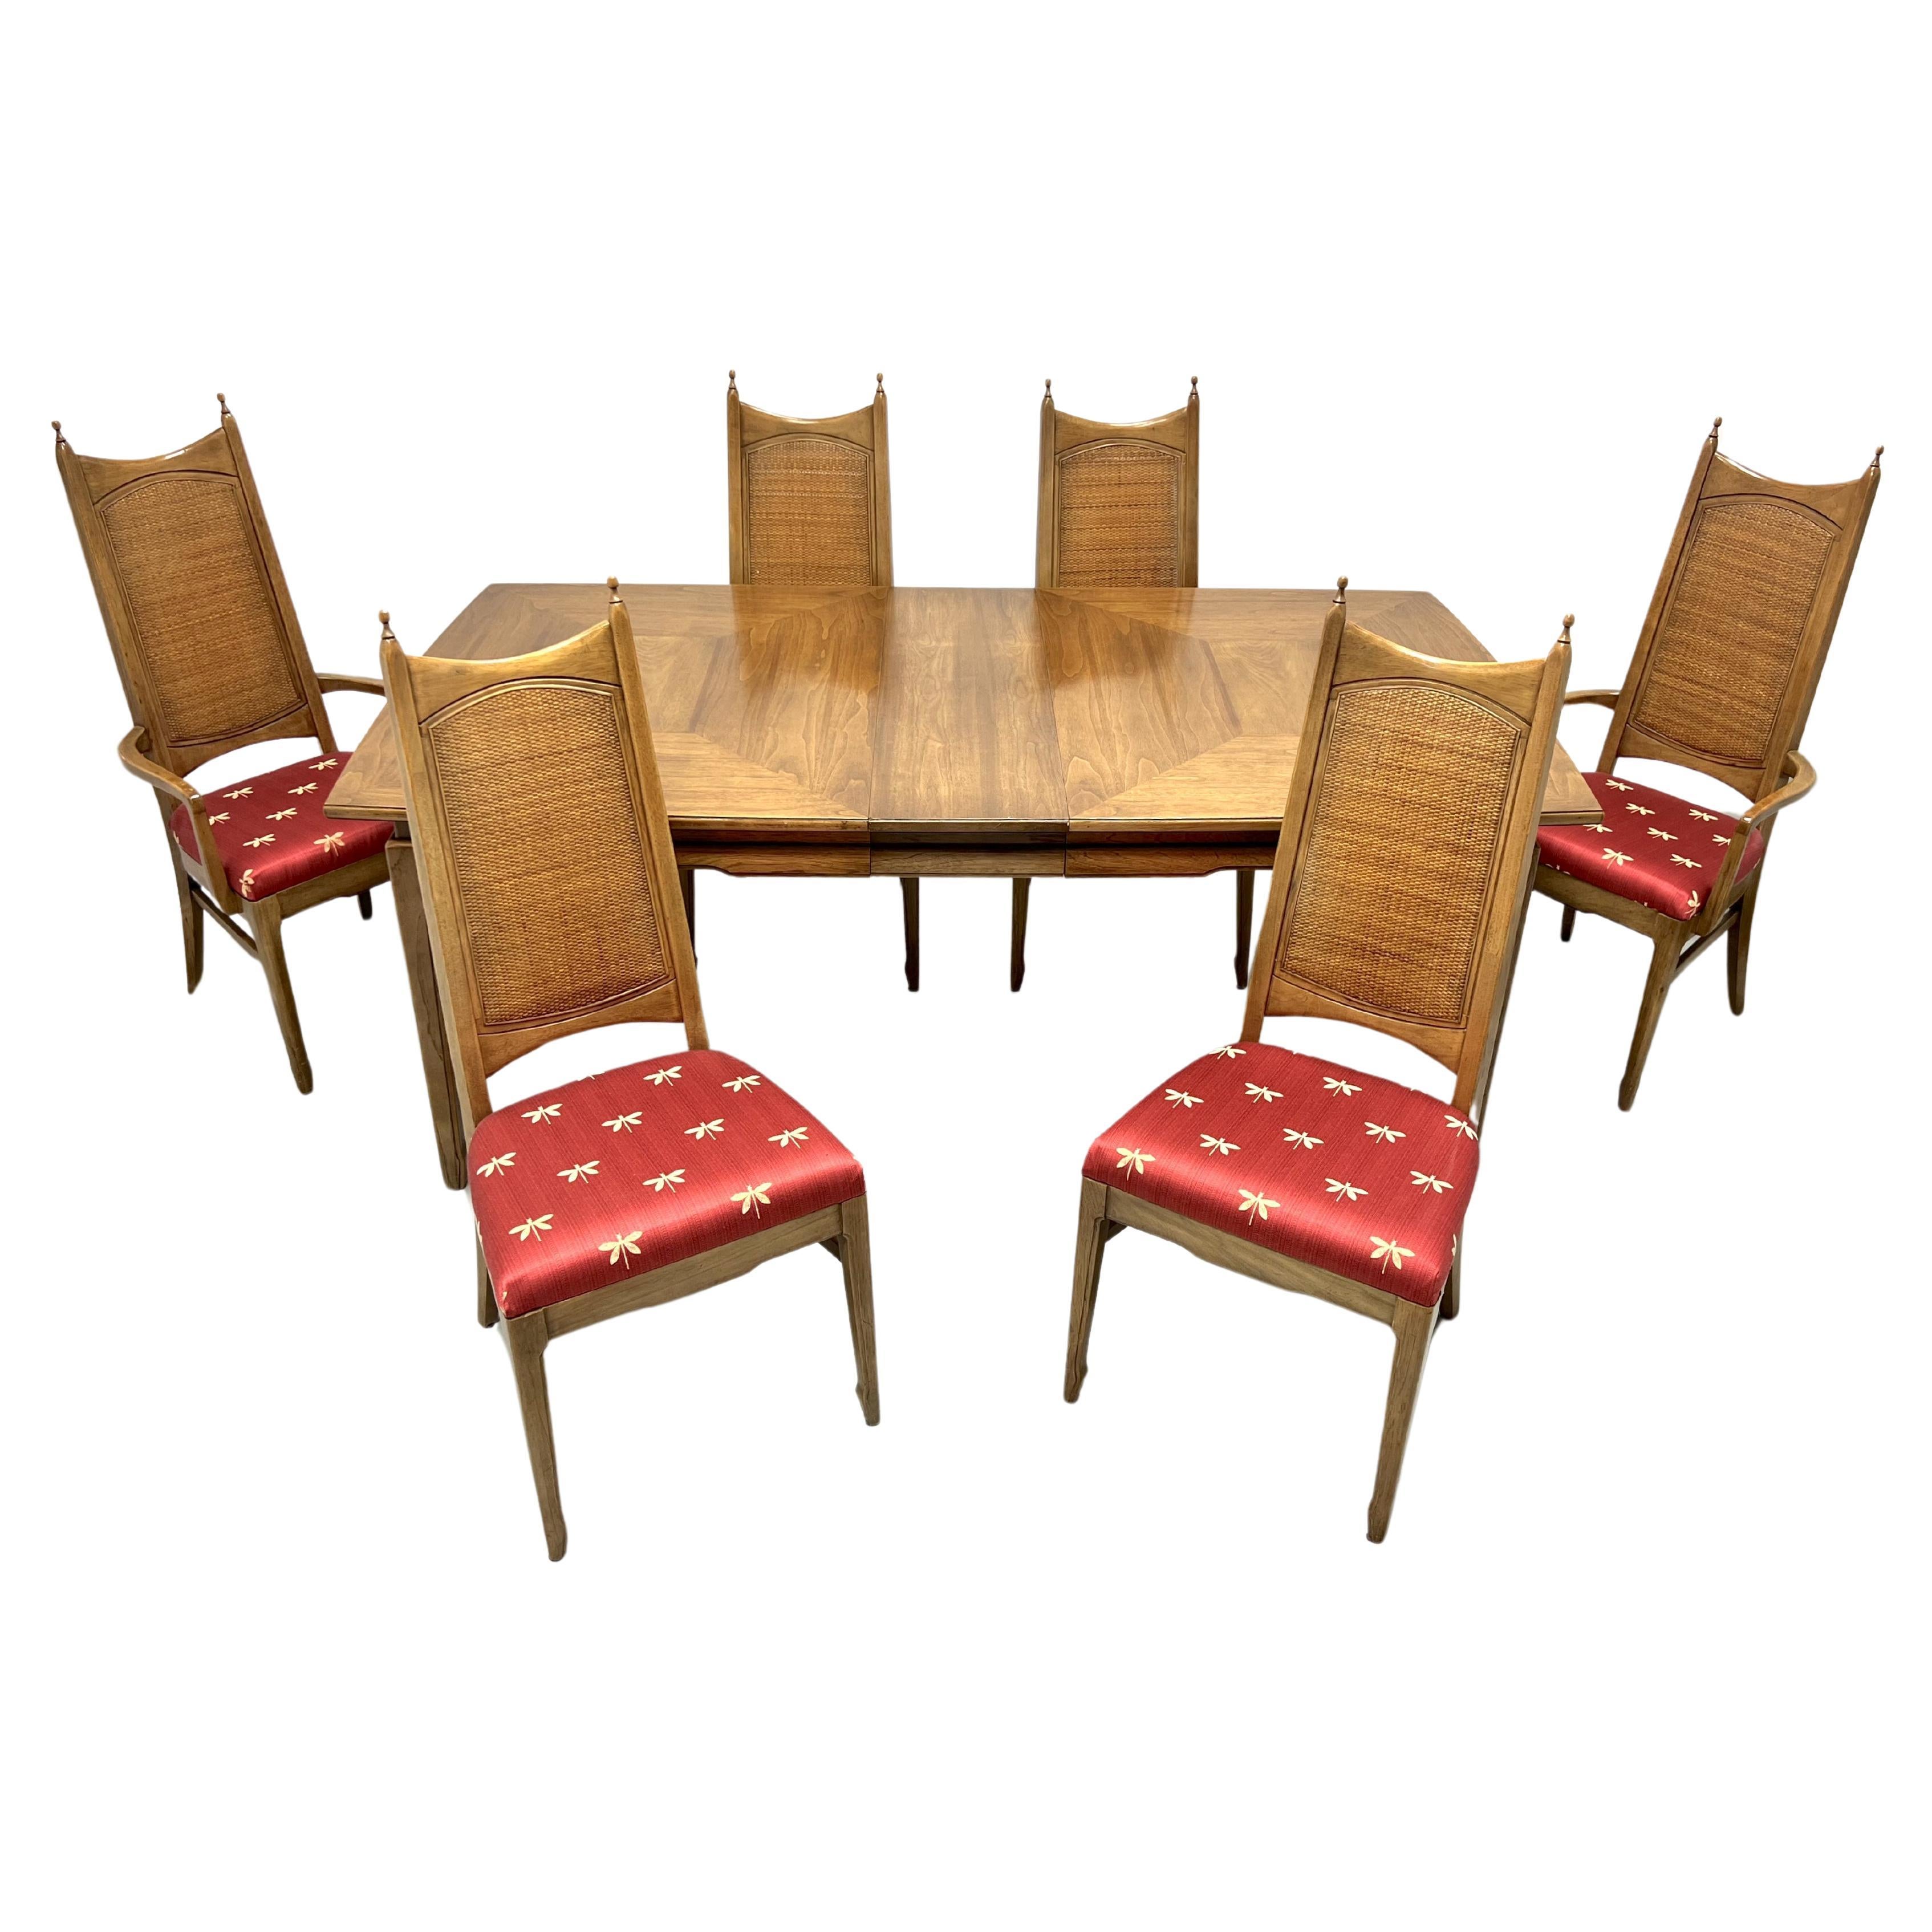 THOMASVILLE Pecan Mid 20th Century Modern MCM Dining Table Set with 6 Chairs For Sale